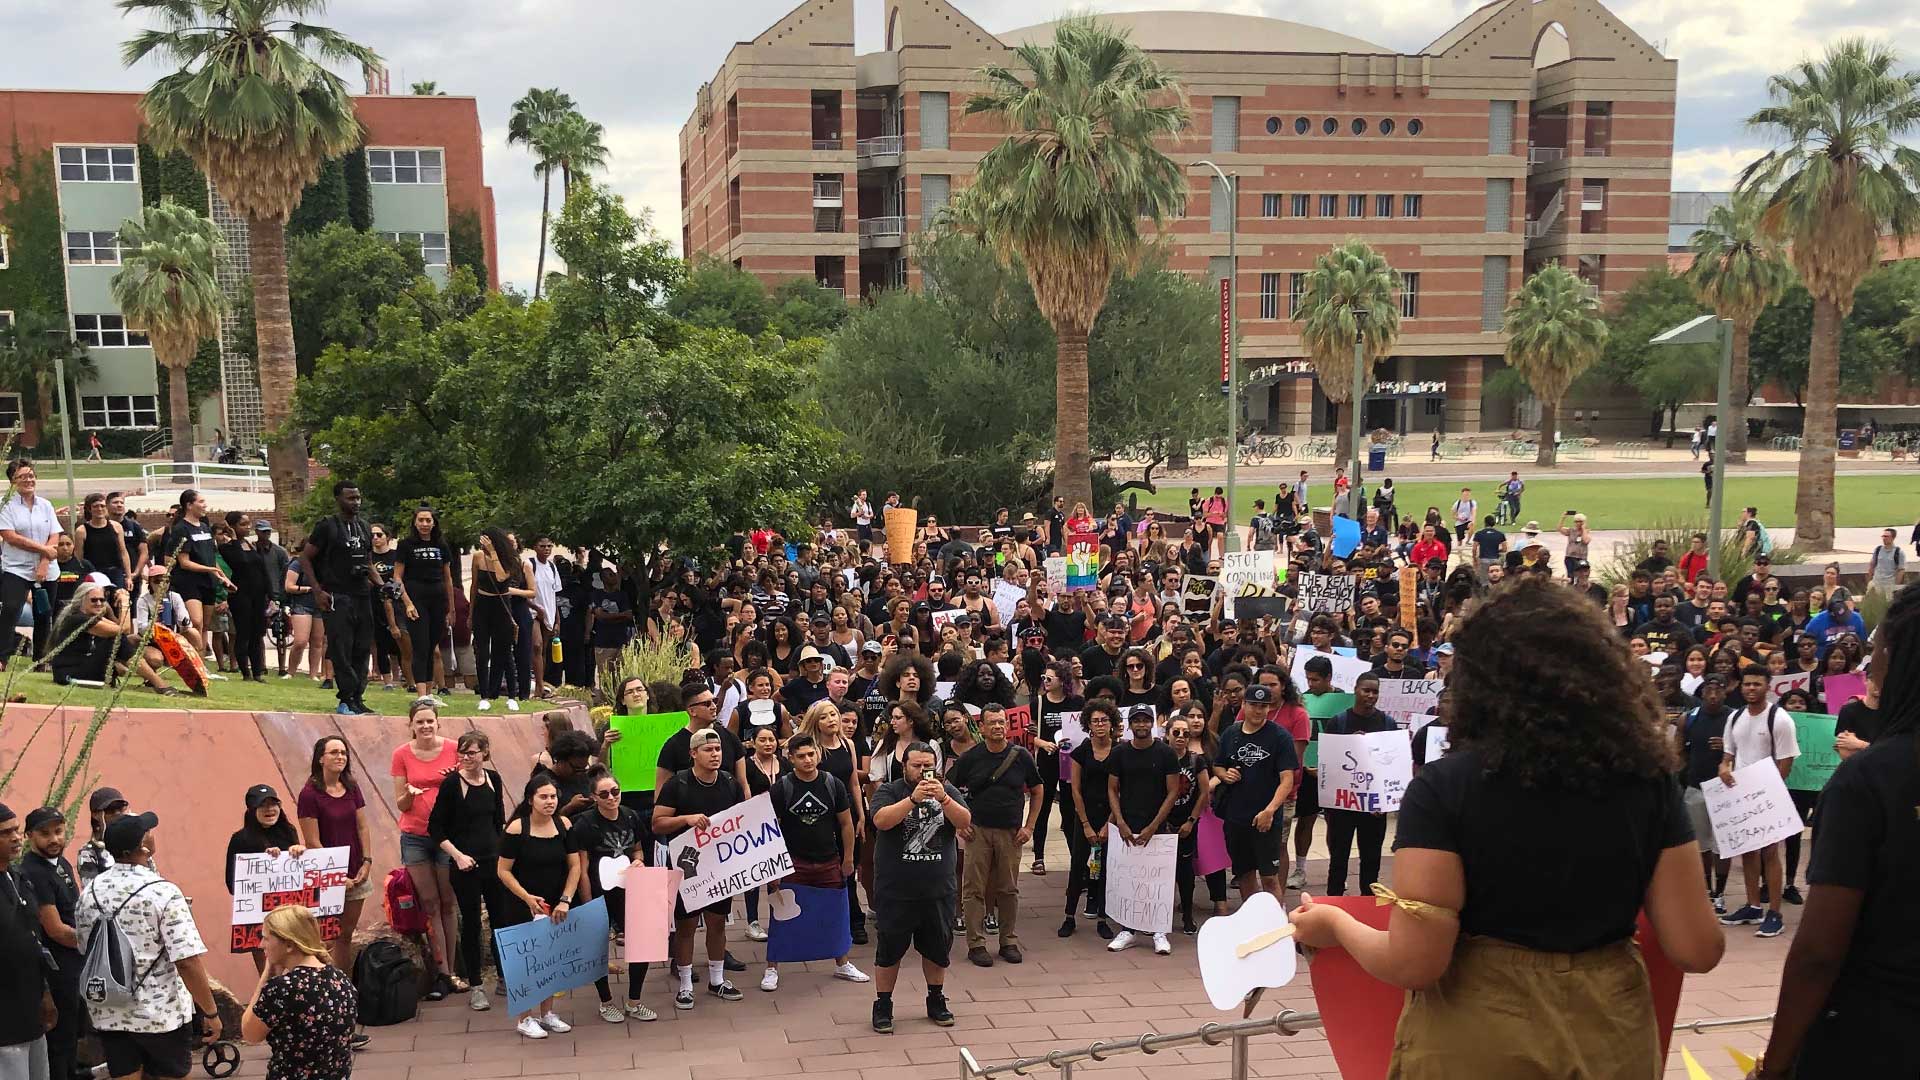 Students protest on the University of Arizona campus Sept. 13, 2019, over the university's response to a reported assault on a black student by two white students.